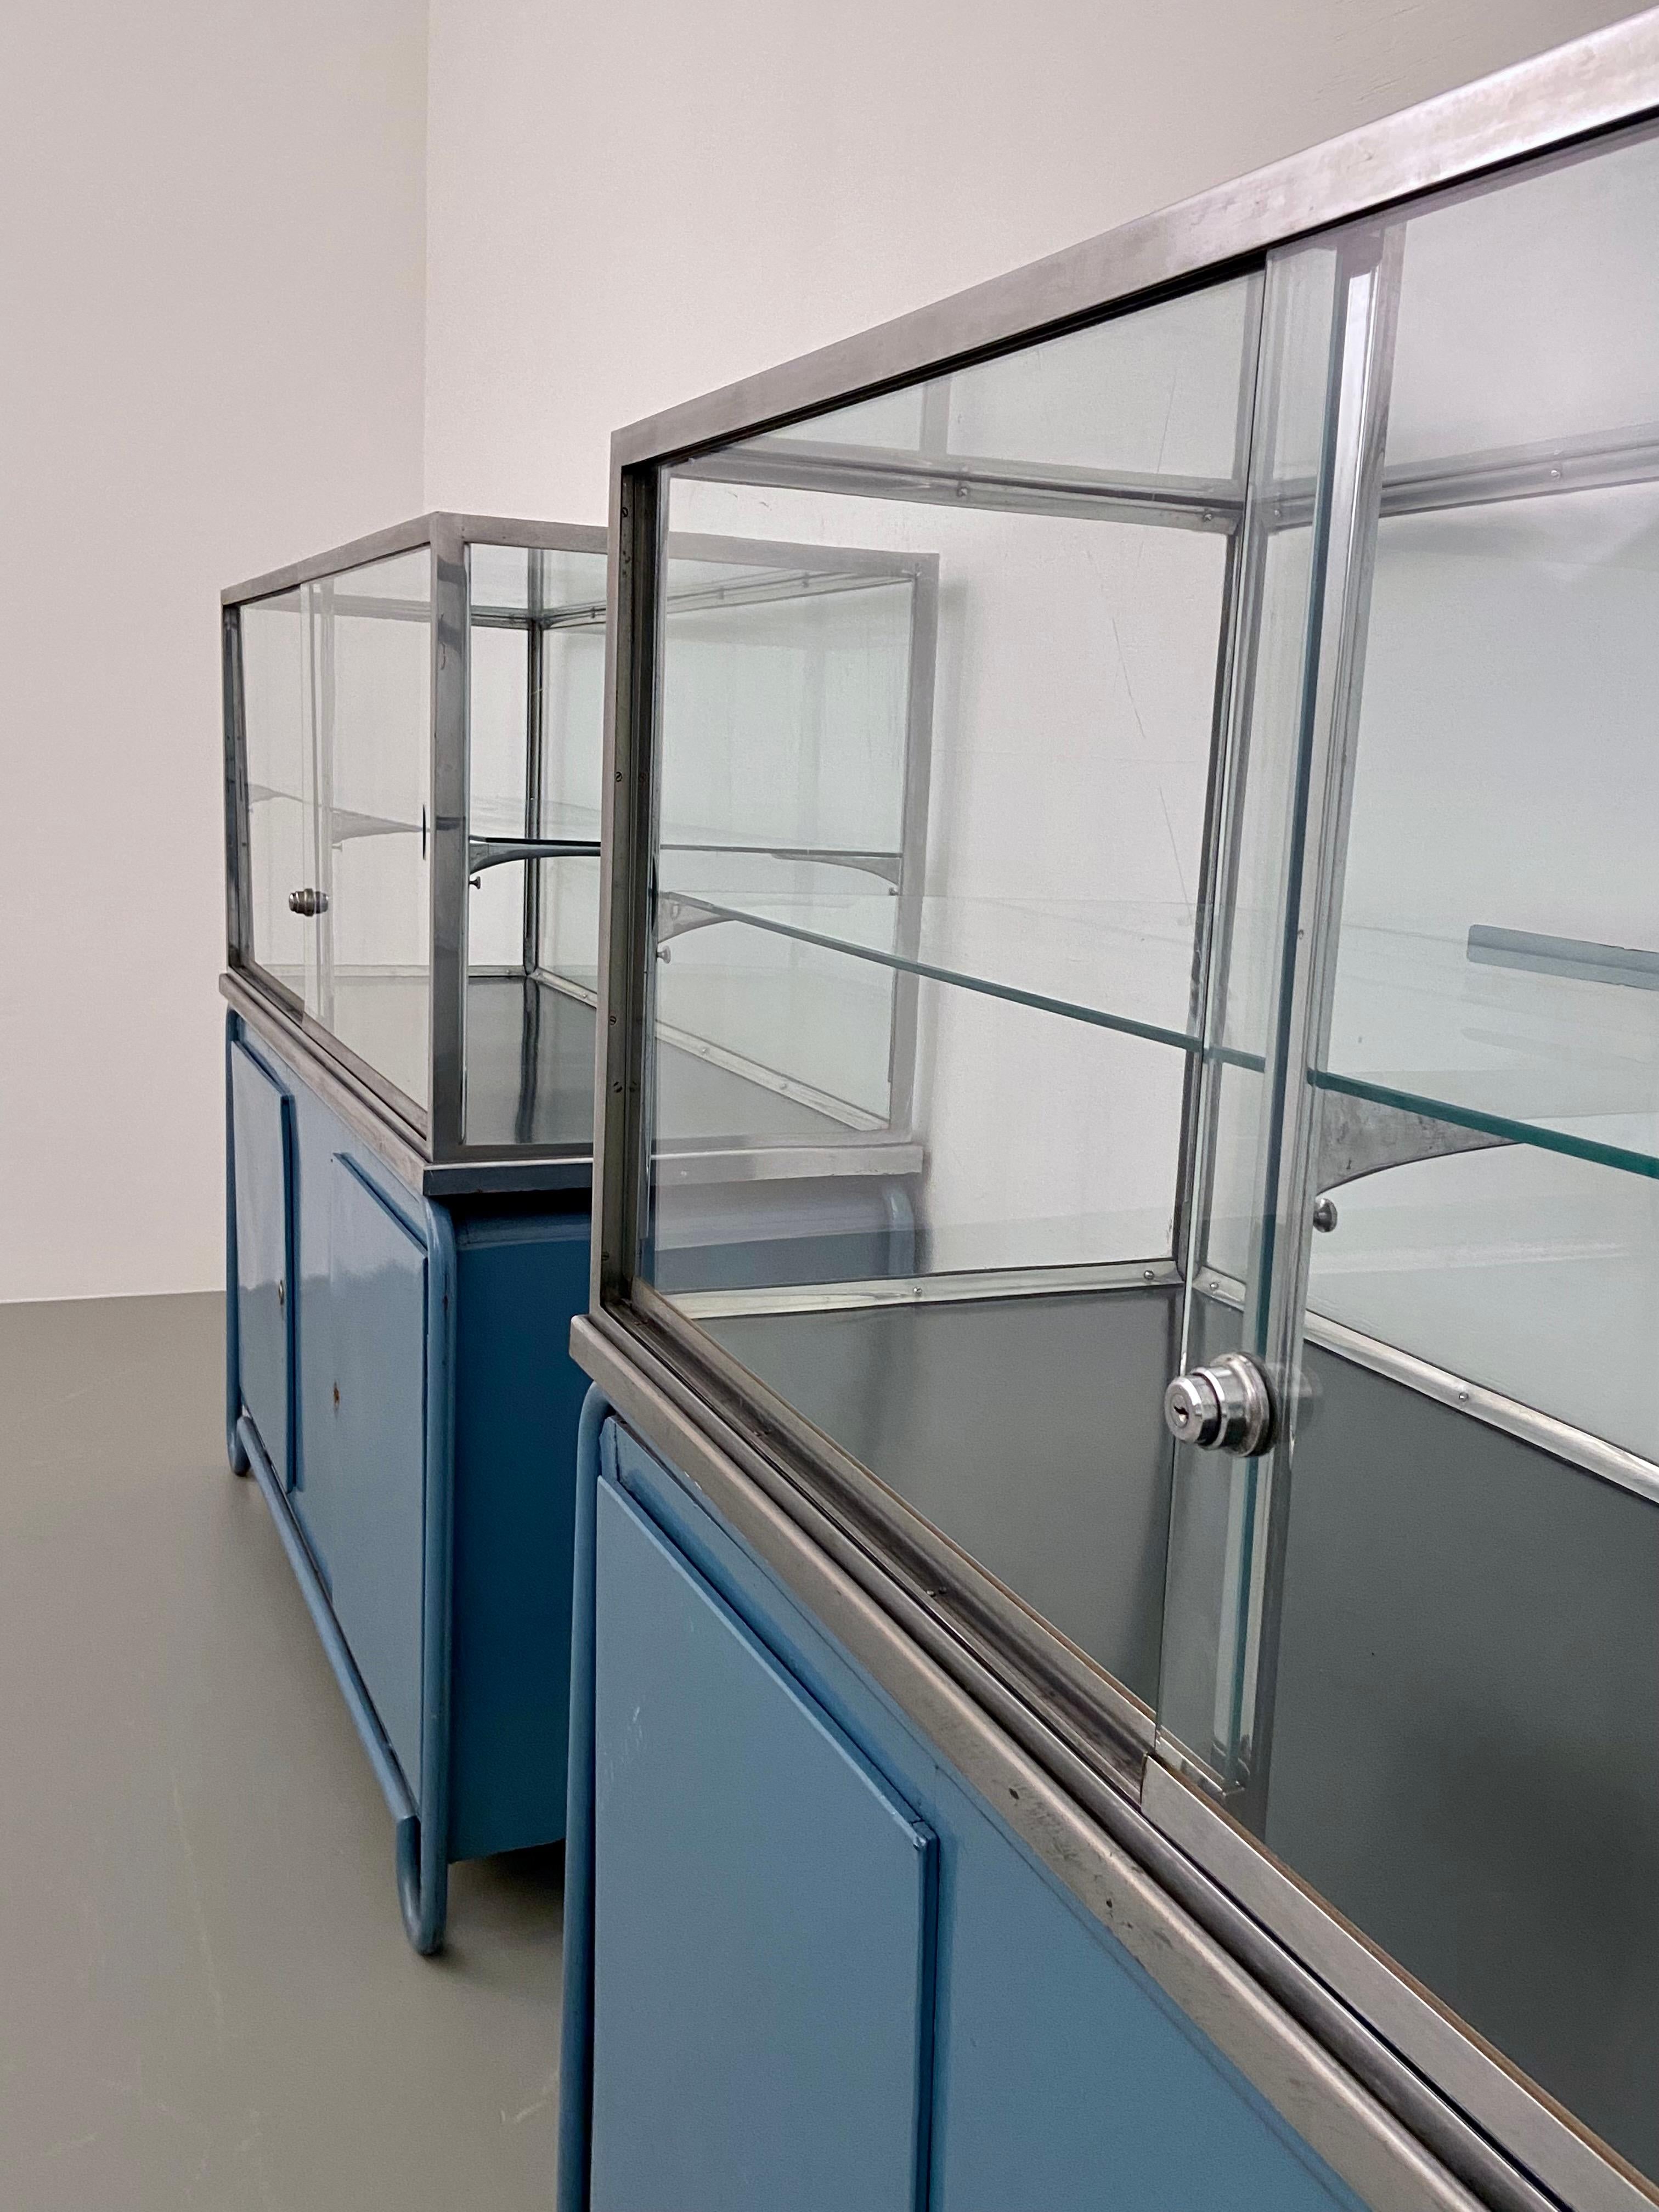 Set of 2 'Fiera Milano' Display Cabinets in Glass, Steel and Wood, Italy, 1950s For Sale 5